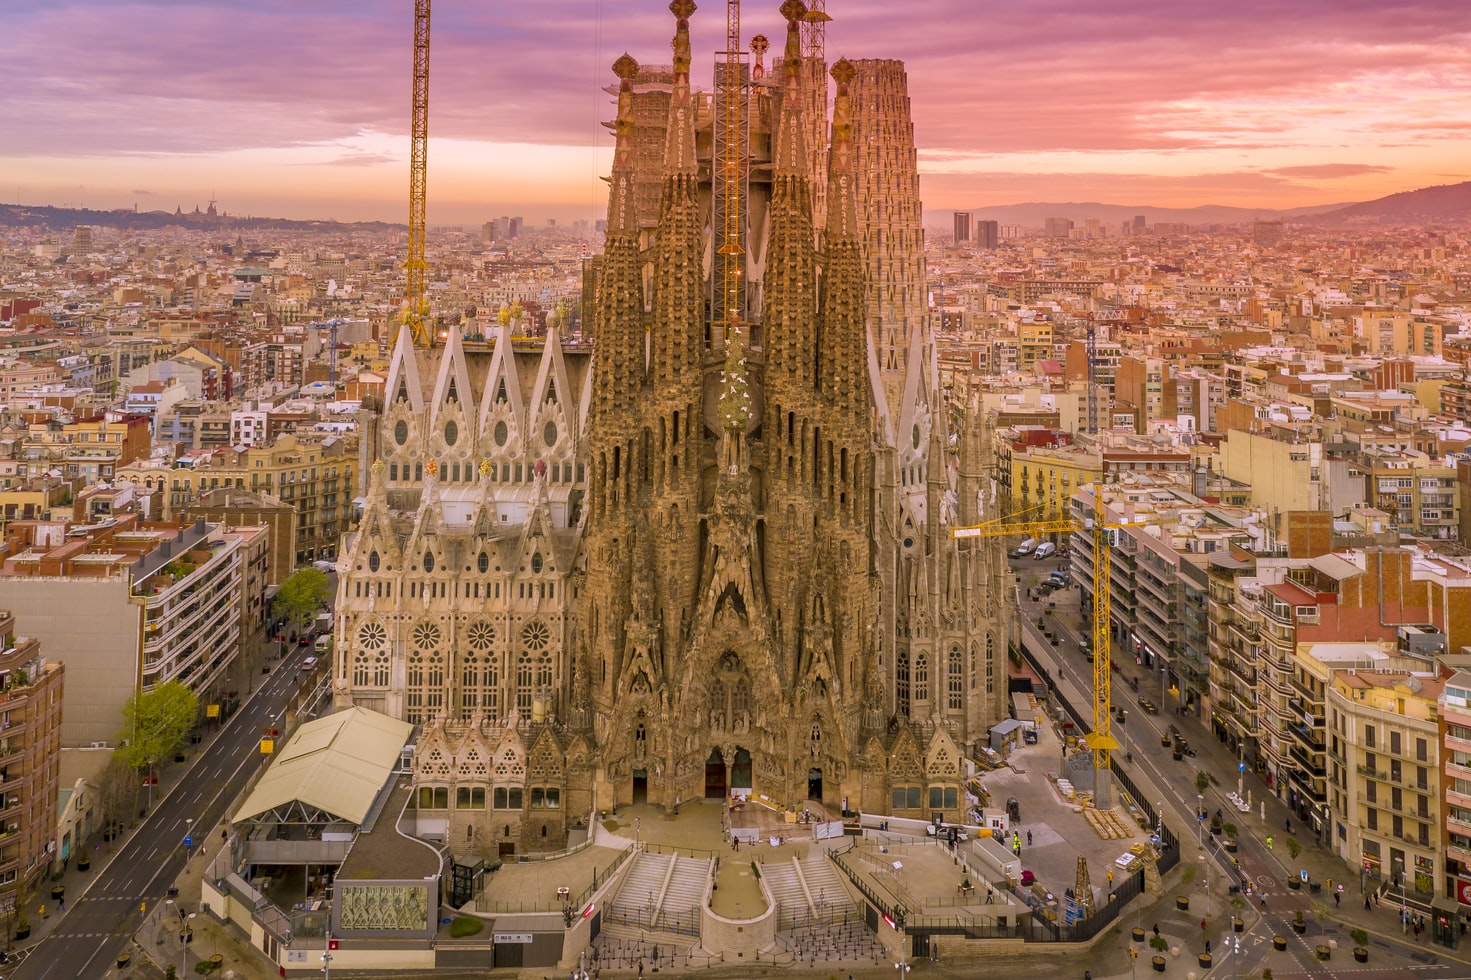 5 most famous churches you cannot miss in Spain